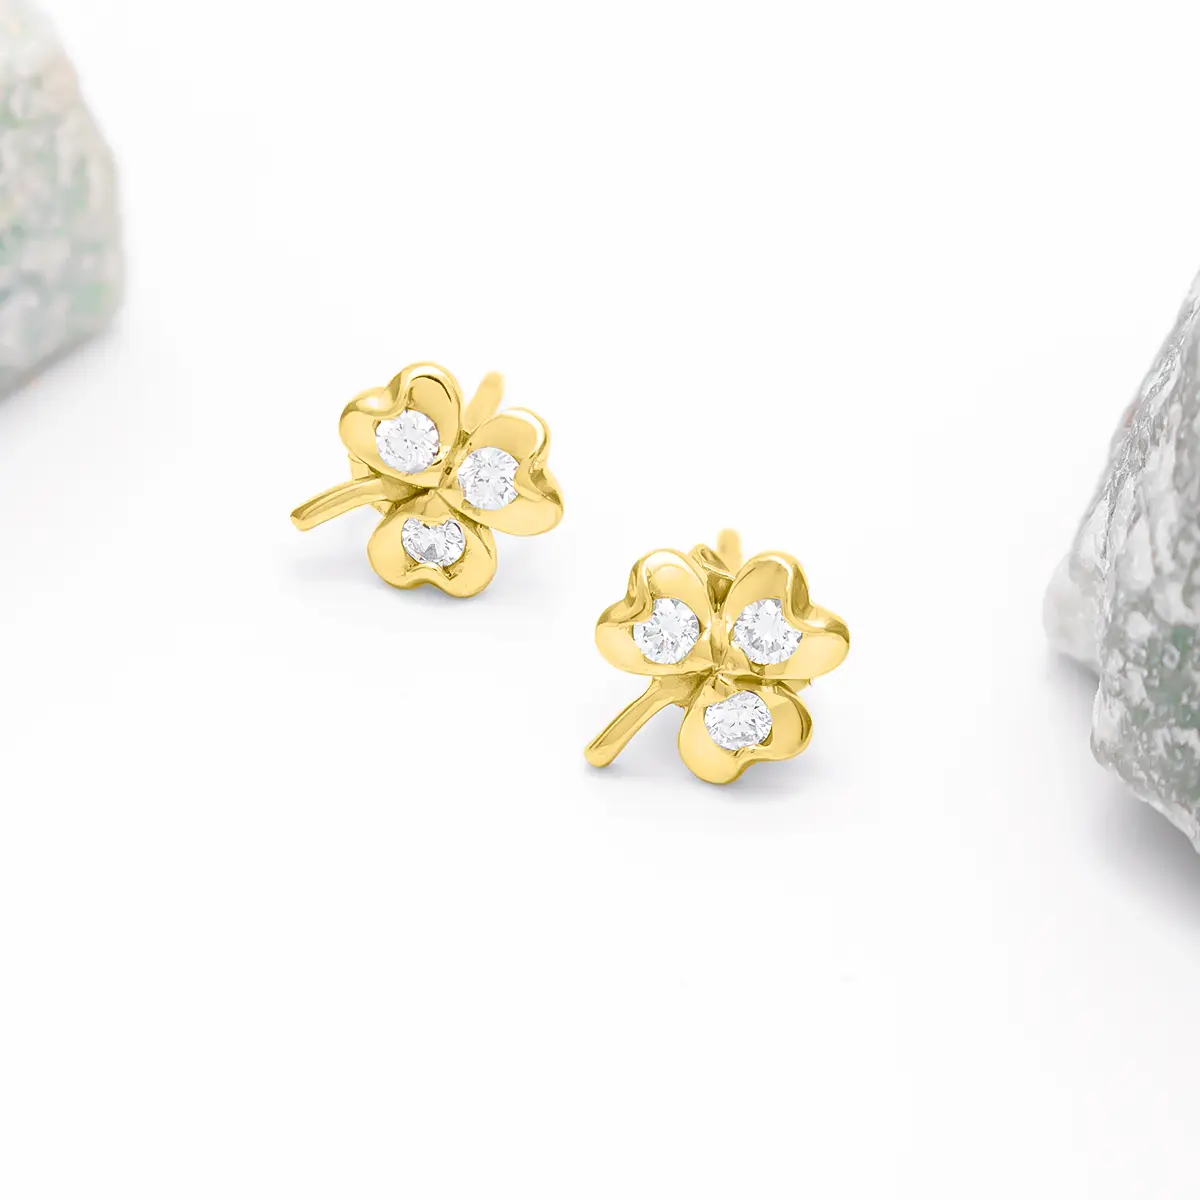 3 Stone Diamond Shamrock Stud Earrings Uniquely Crafted In 14k Gold 5...